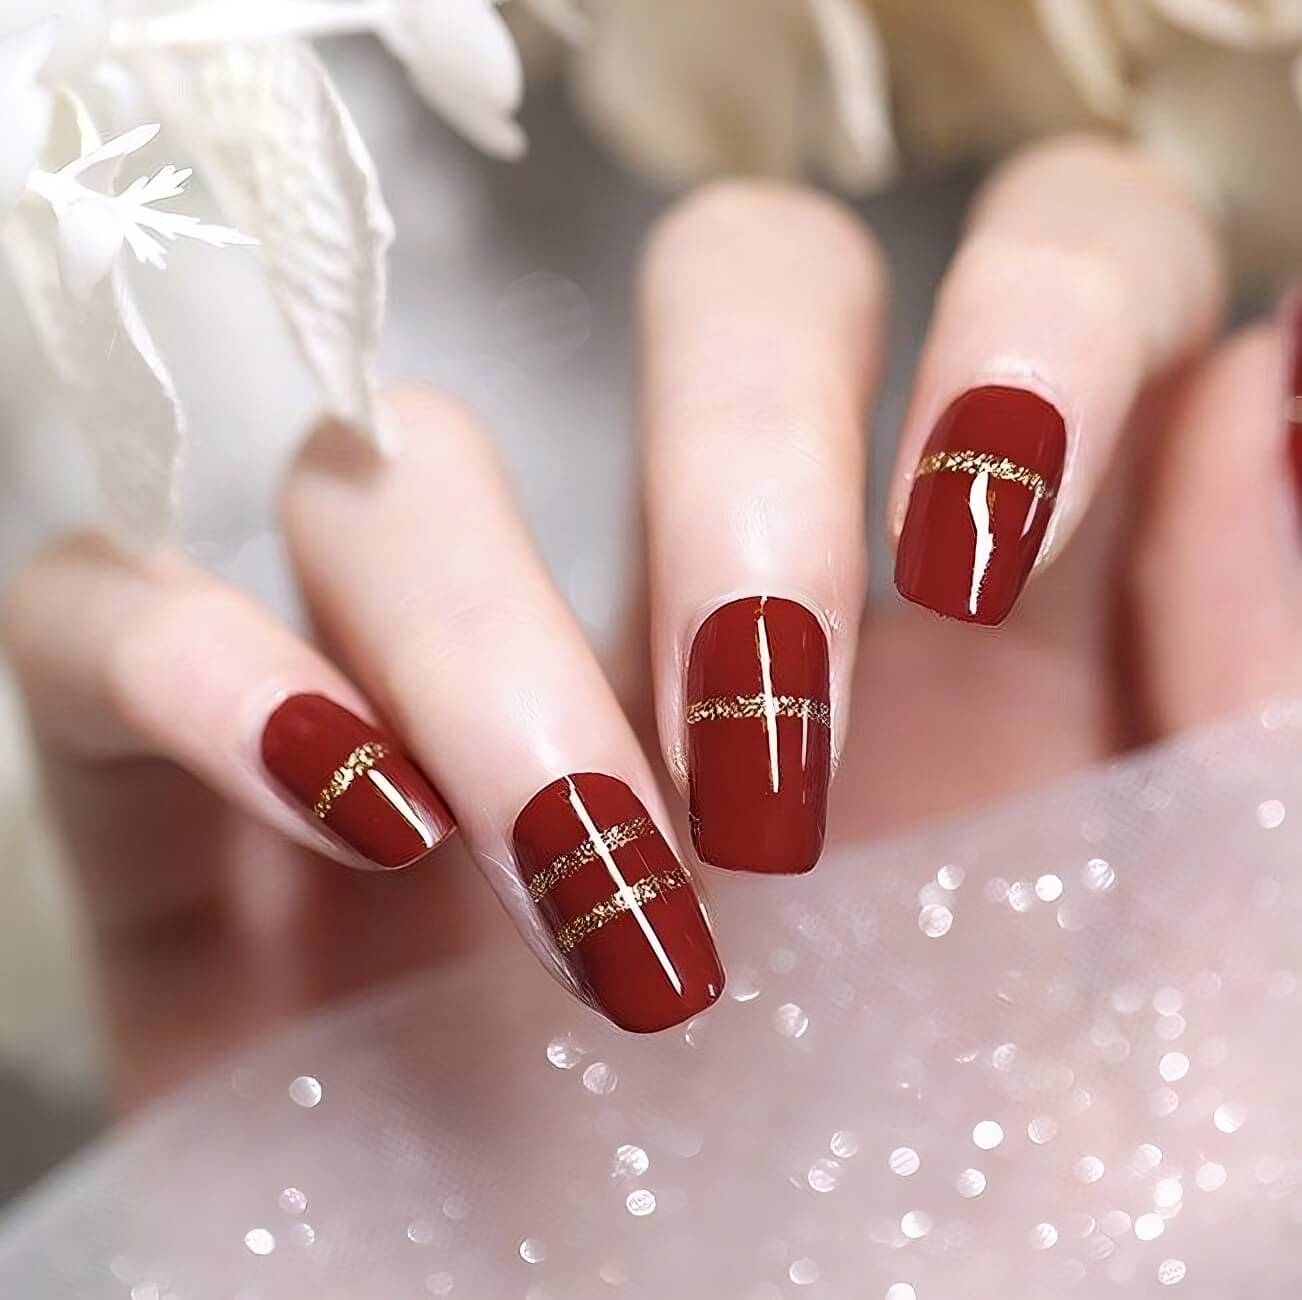 30 One-Of-A-Kind Red Nail Designs To Impress Anybody - 225